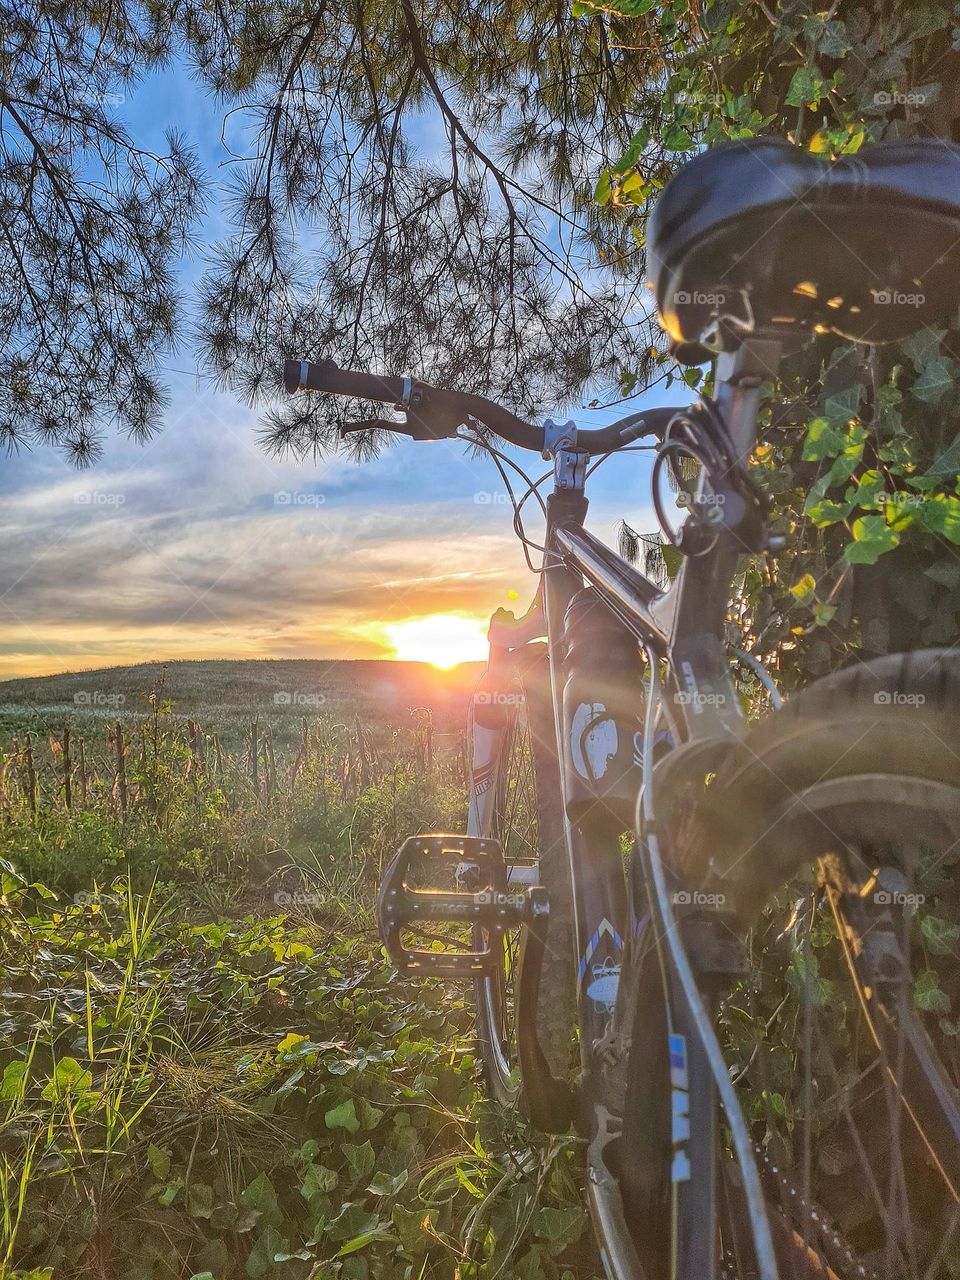 Sunset view with my bike